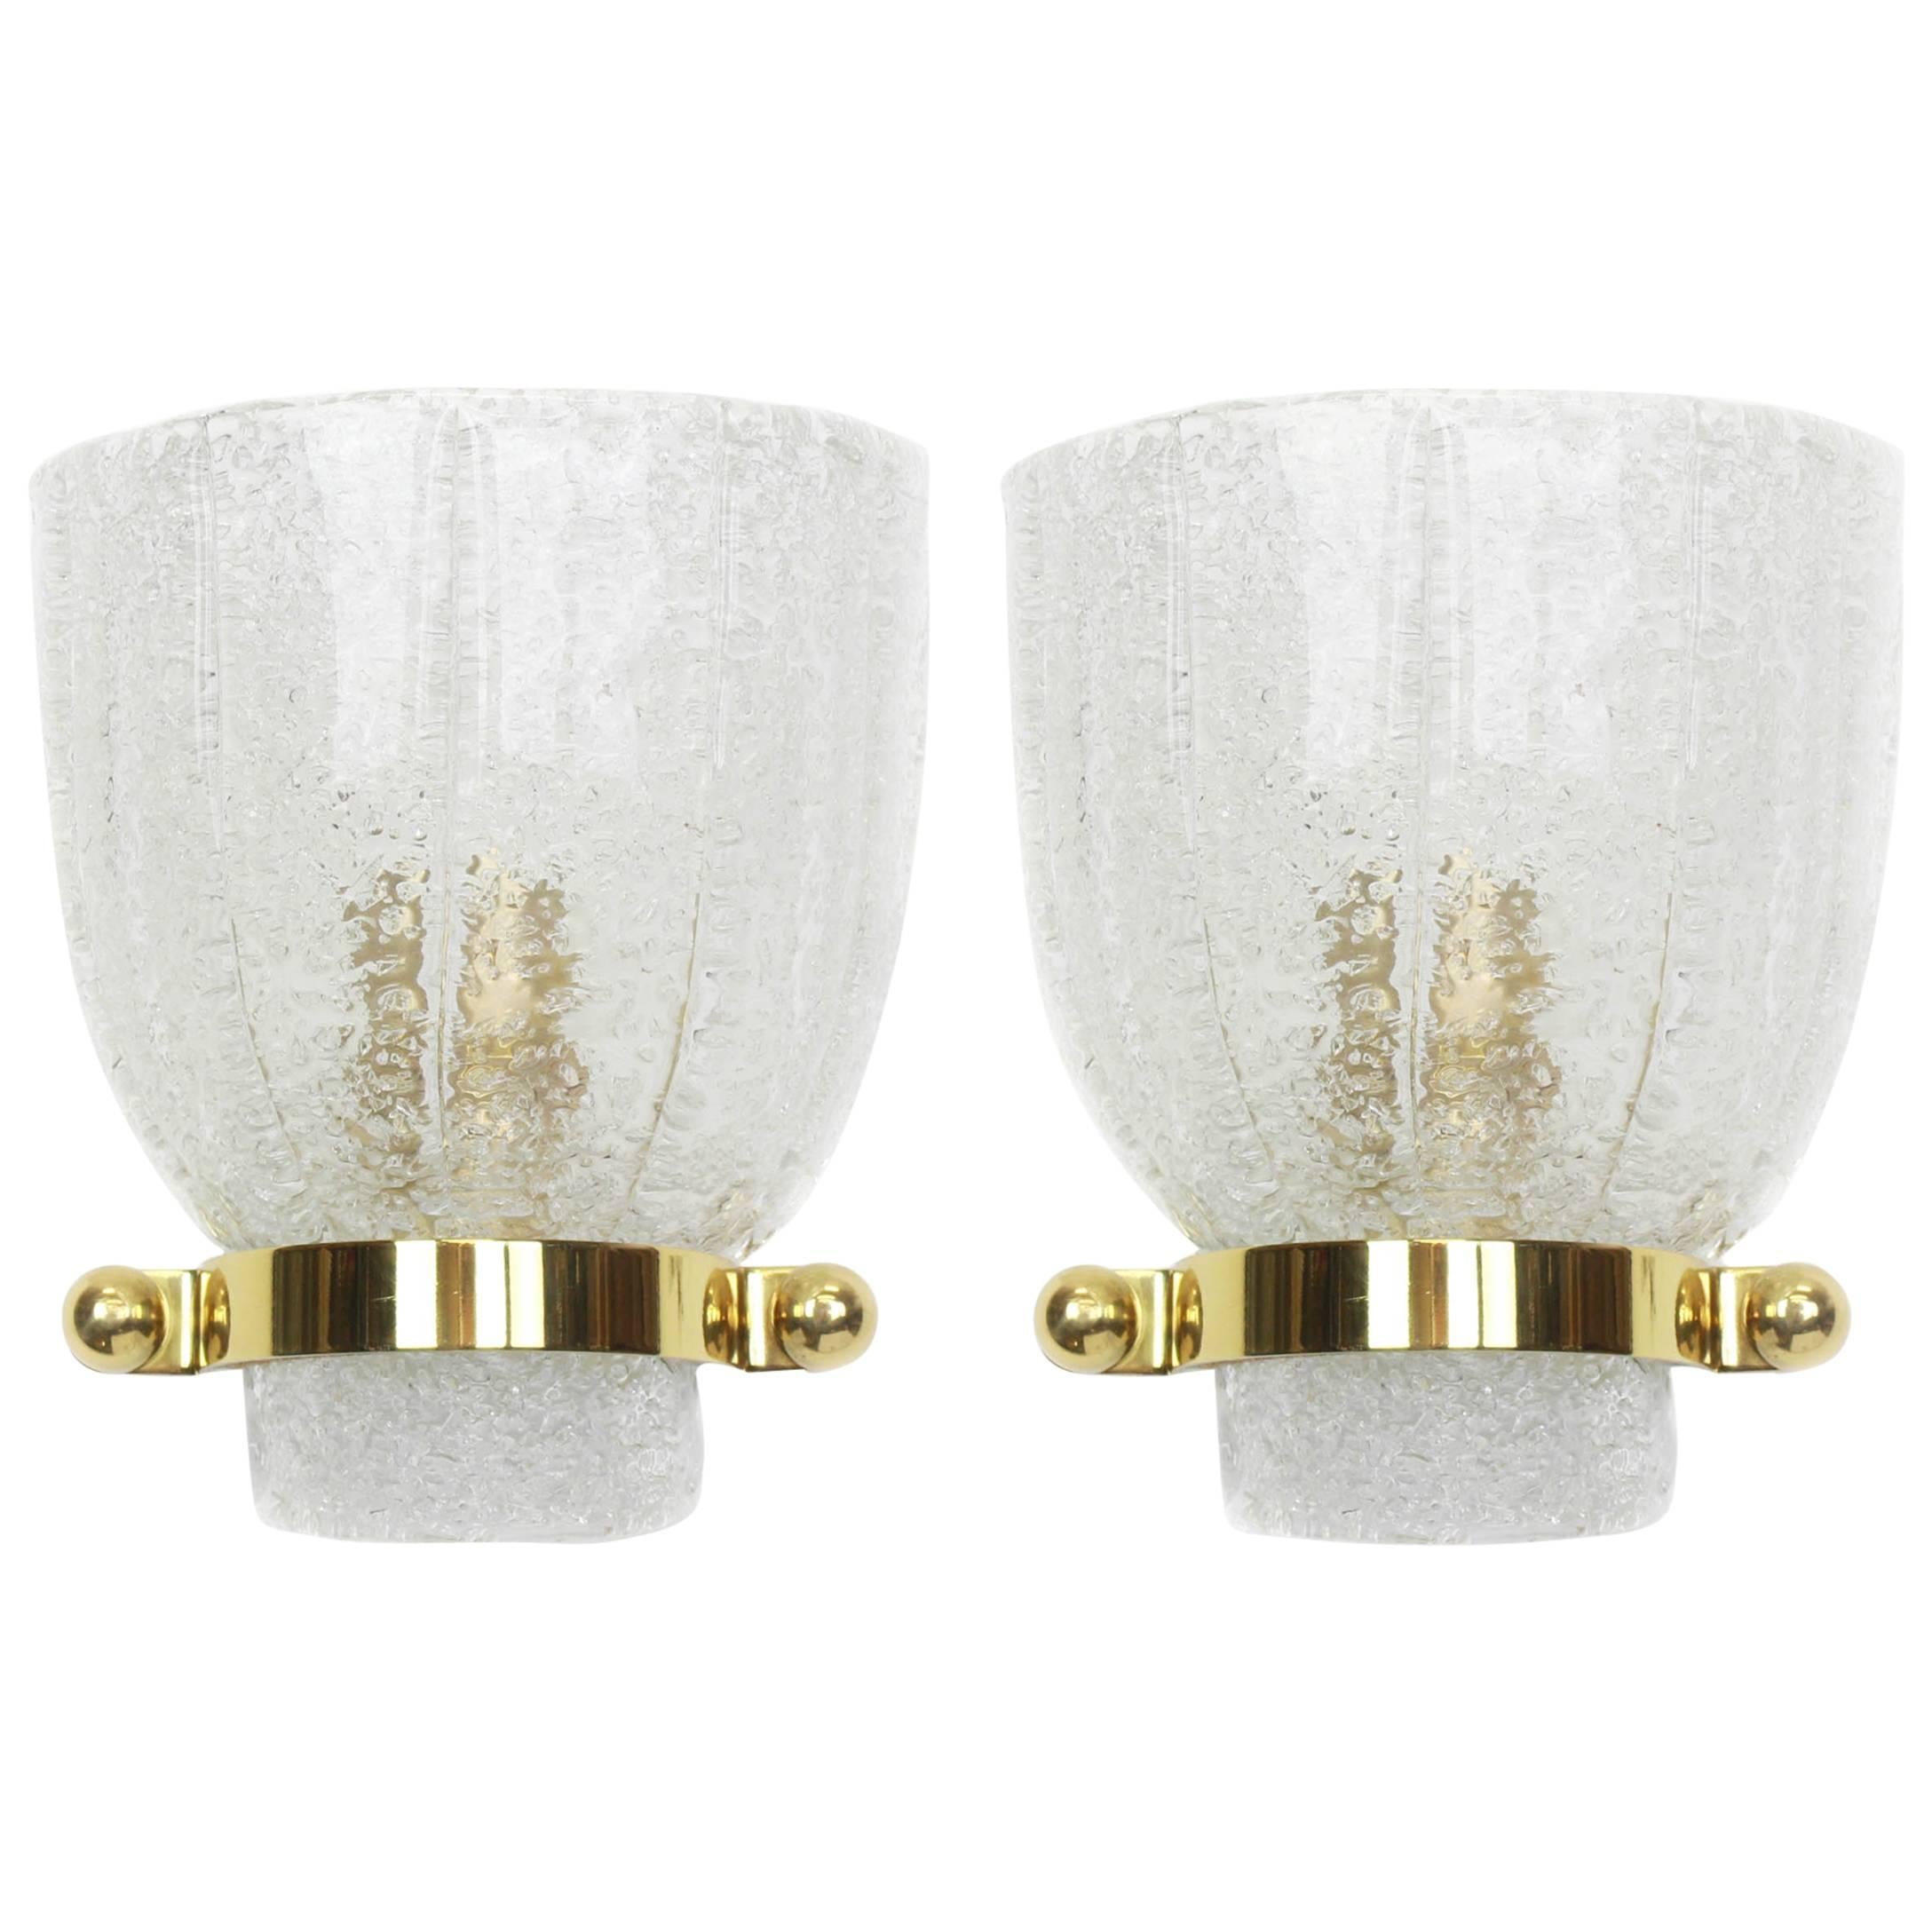 Pair of Midcentury Murano Glass Wall Sconces by Hillebrand, Germany, 1960s